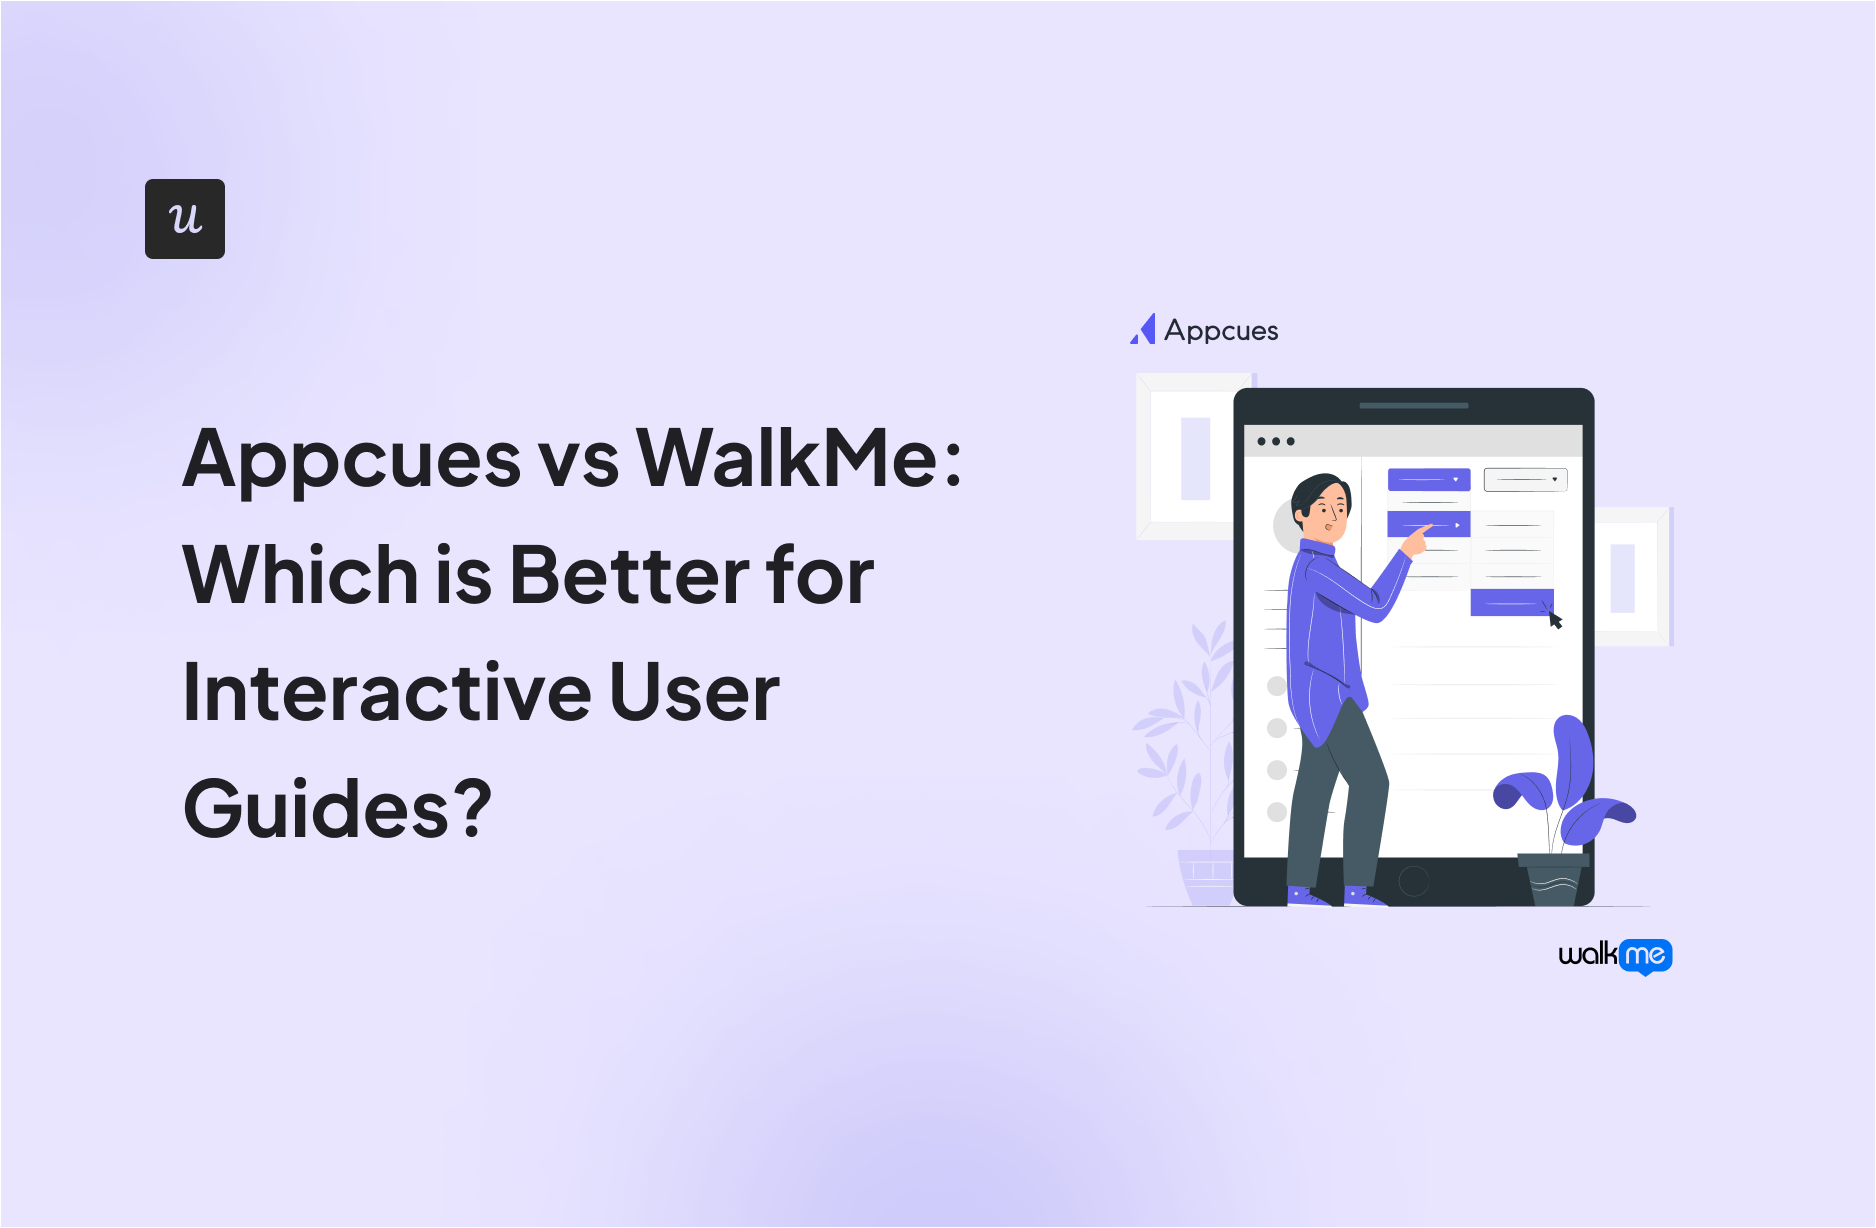 Appcues vs WalkMe: Which is Better for Interactive User Guides?